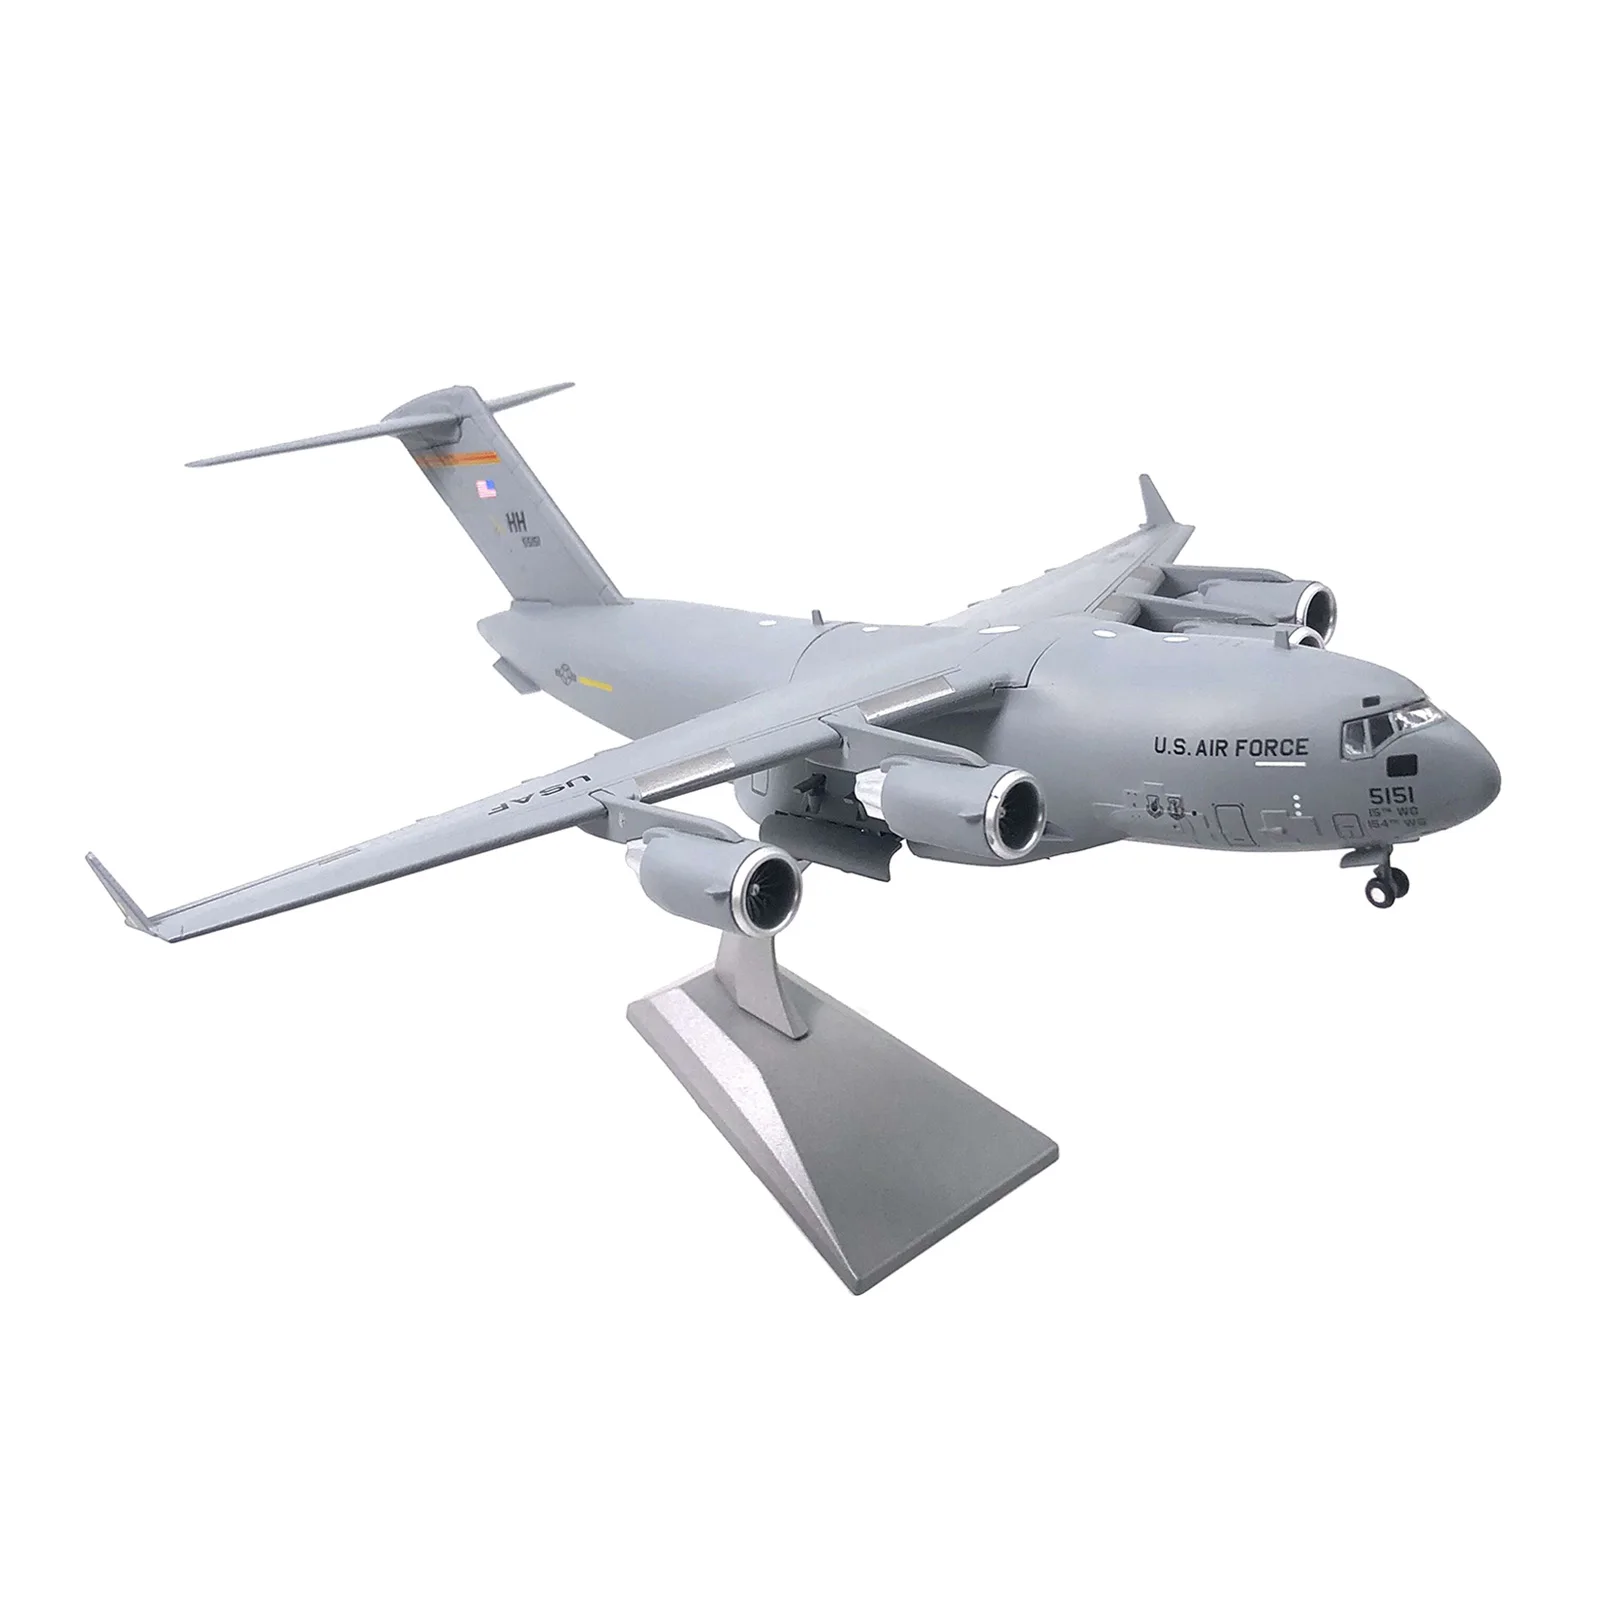 1:200 Scale Model US Air Force US C-17 Military Transporter Aircraft Model Toys 